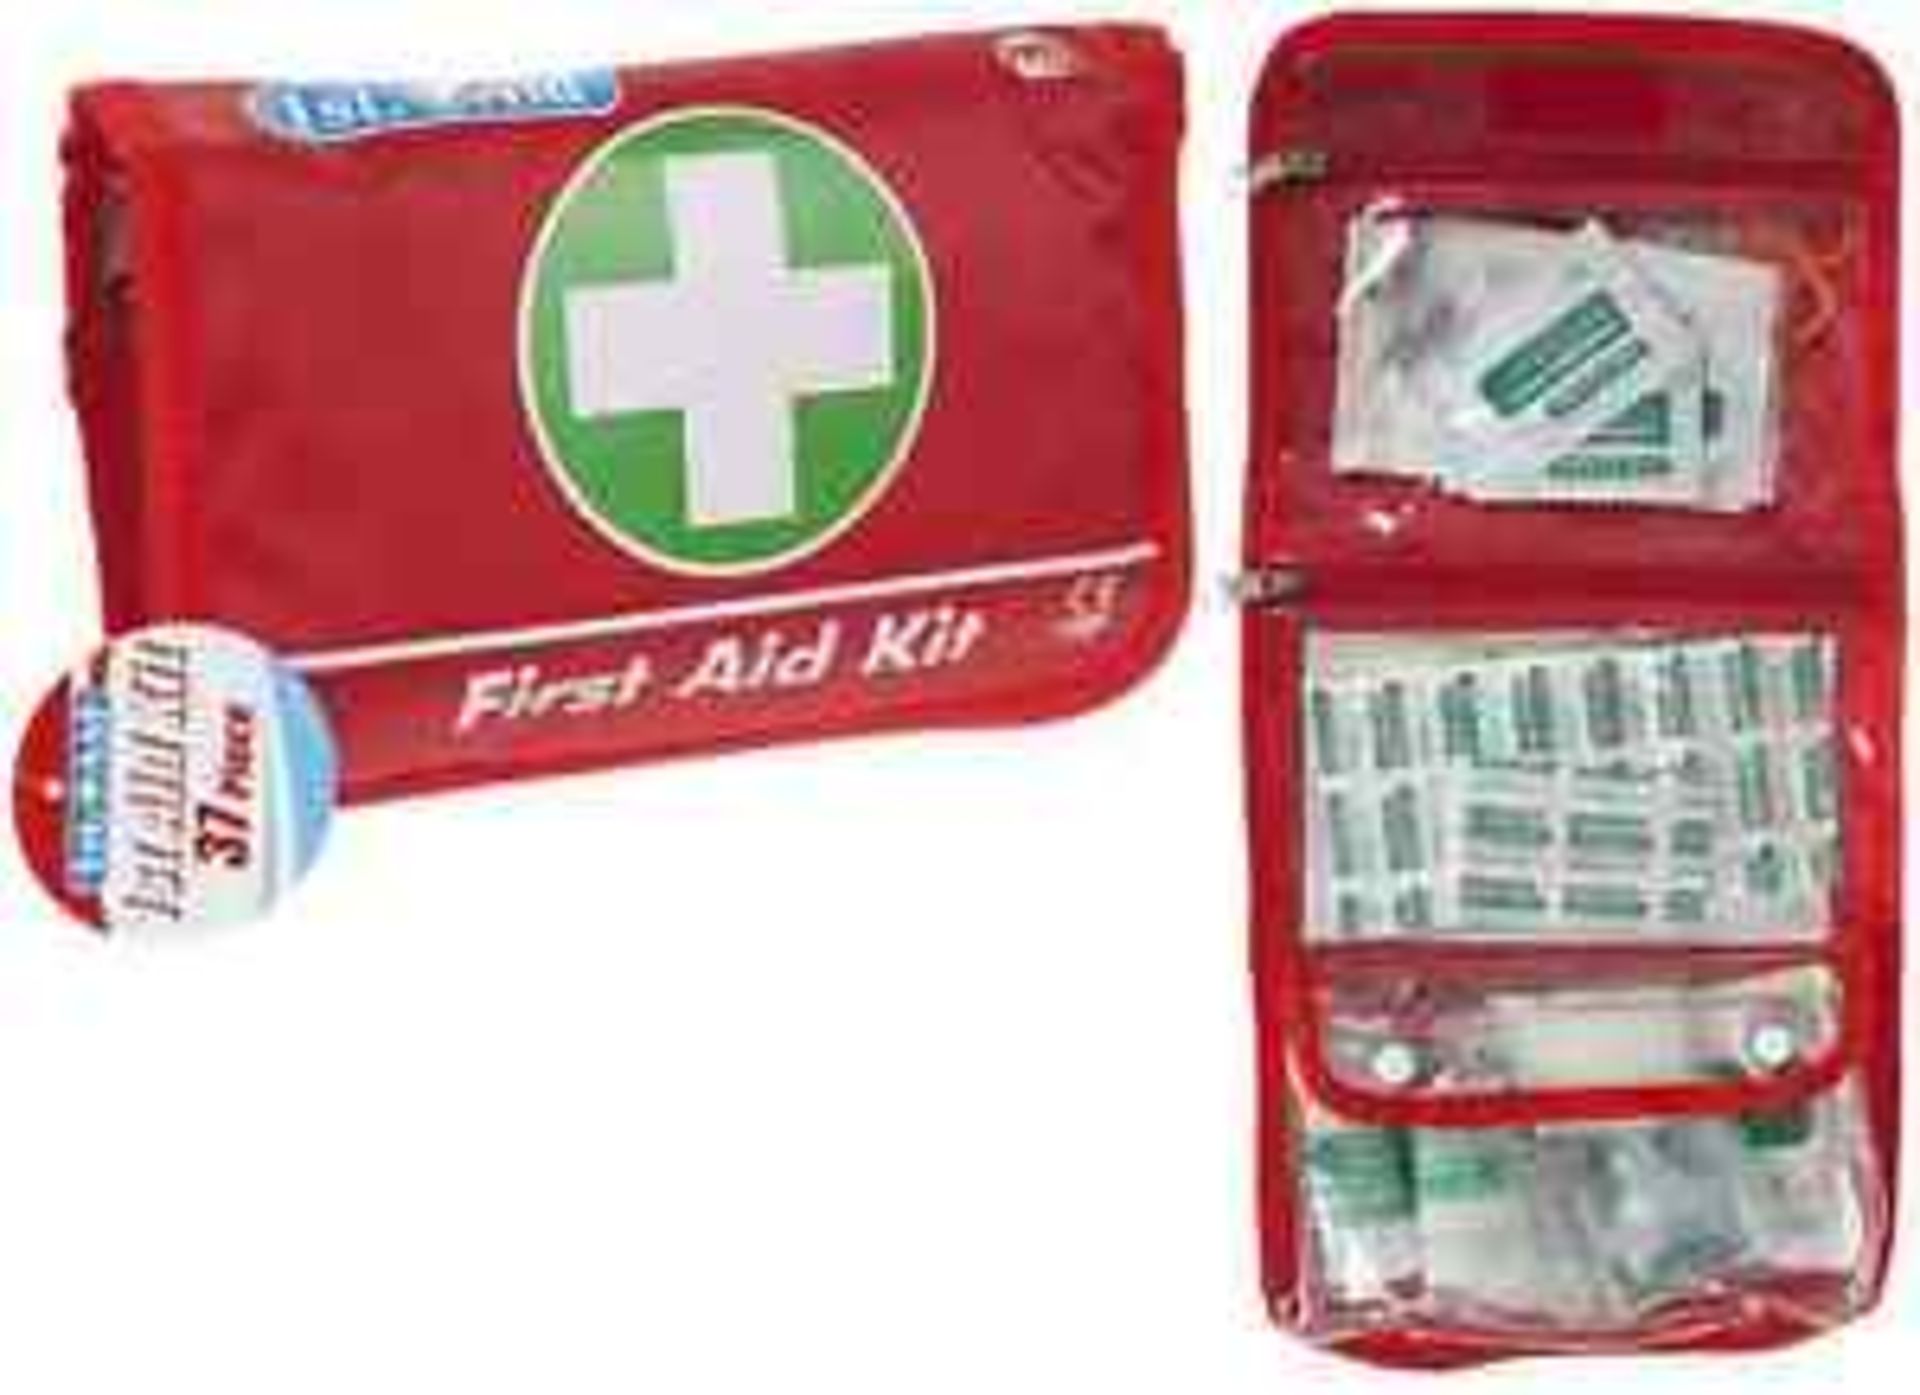 V *TRADE QTY* Brand New 37 Piece First Aid Kit In Pouch X 7 YOUR BID PRICE TO BE MULTIPLIED BY